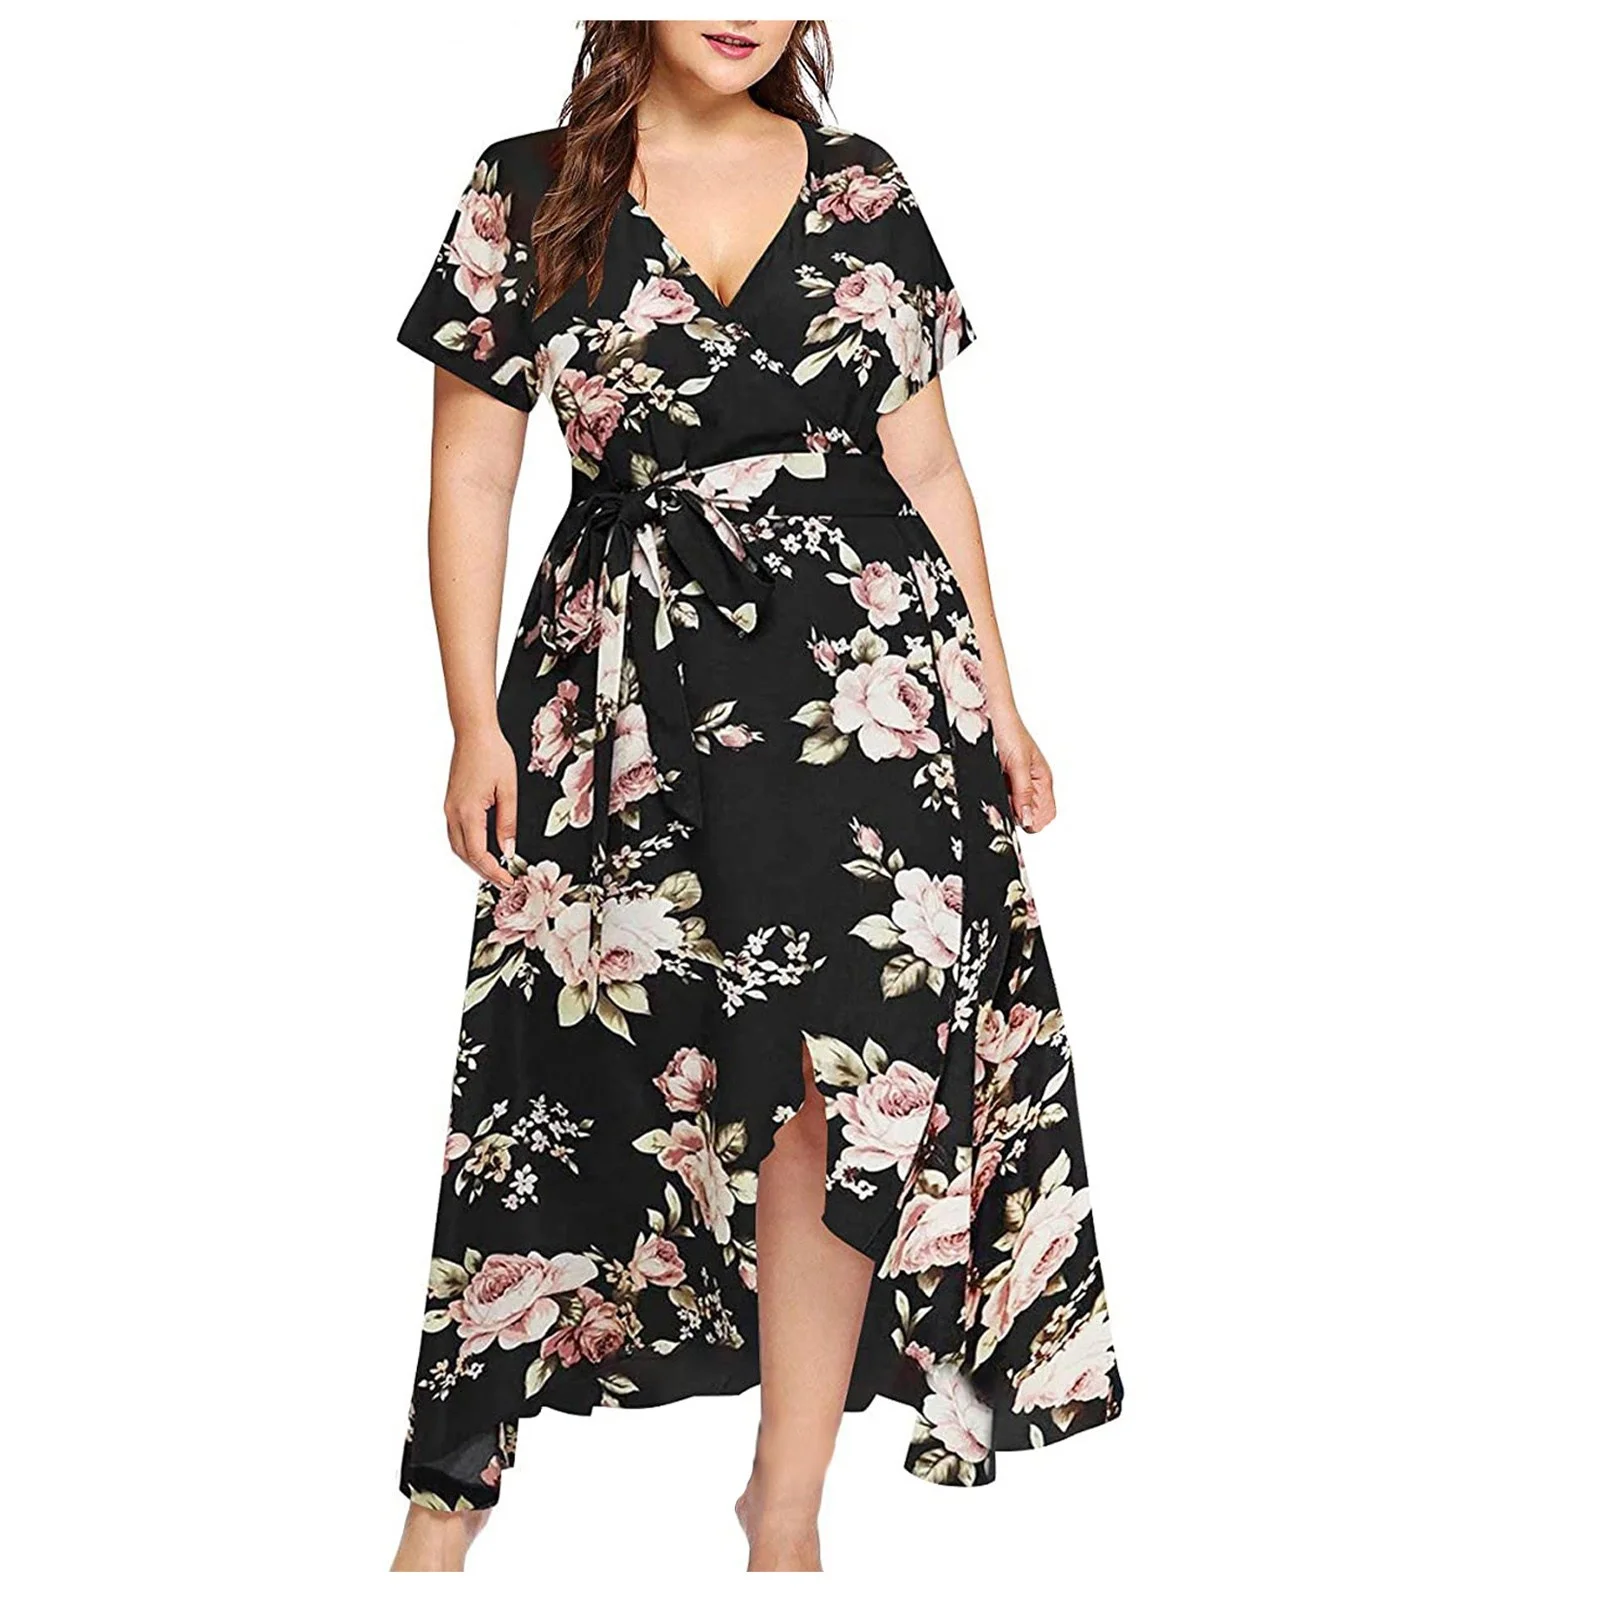 

Plus Size Maxi Dresses For Women Women's Casual High Waist Belly Concealing V-neck Print Beach Dresses Vestidos Mujer